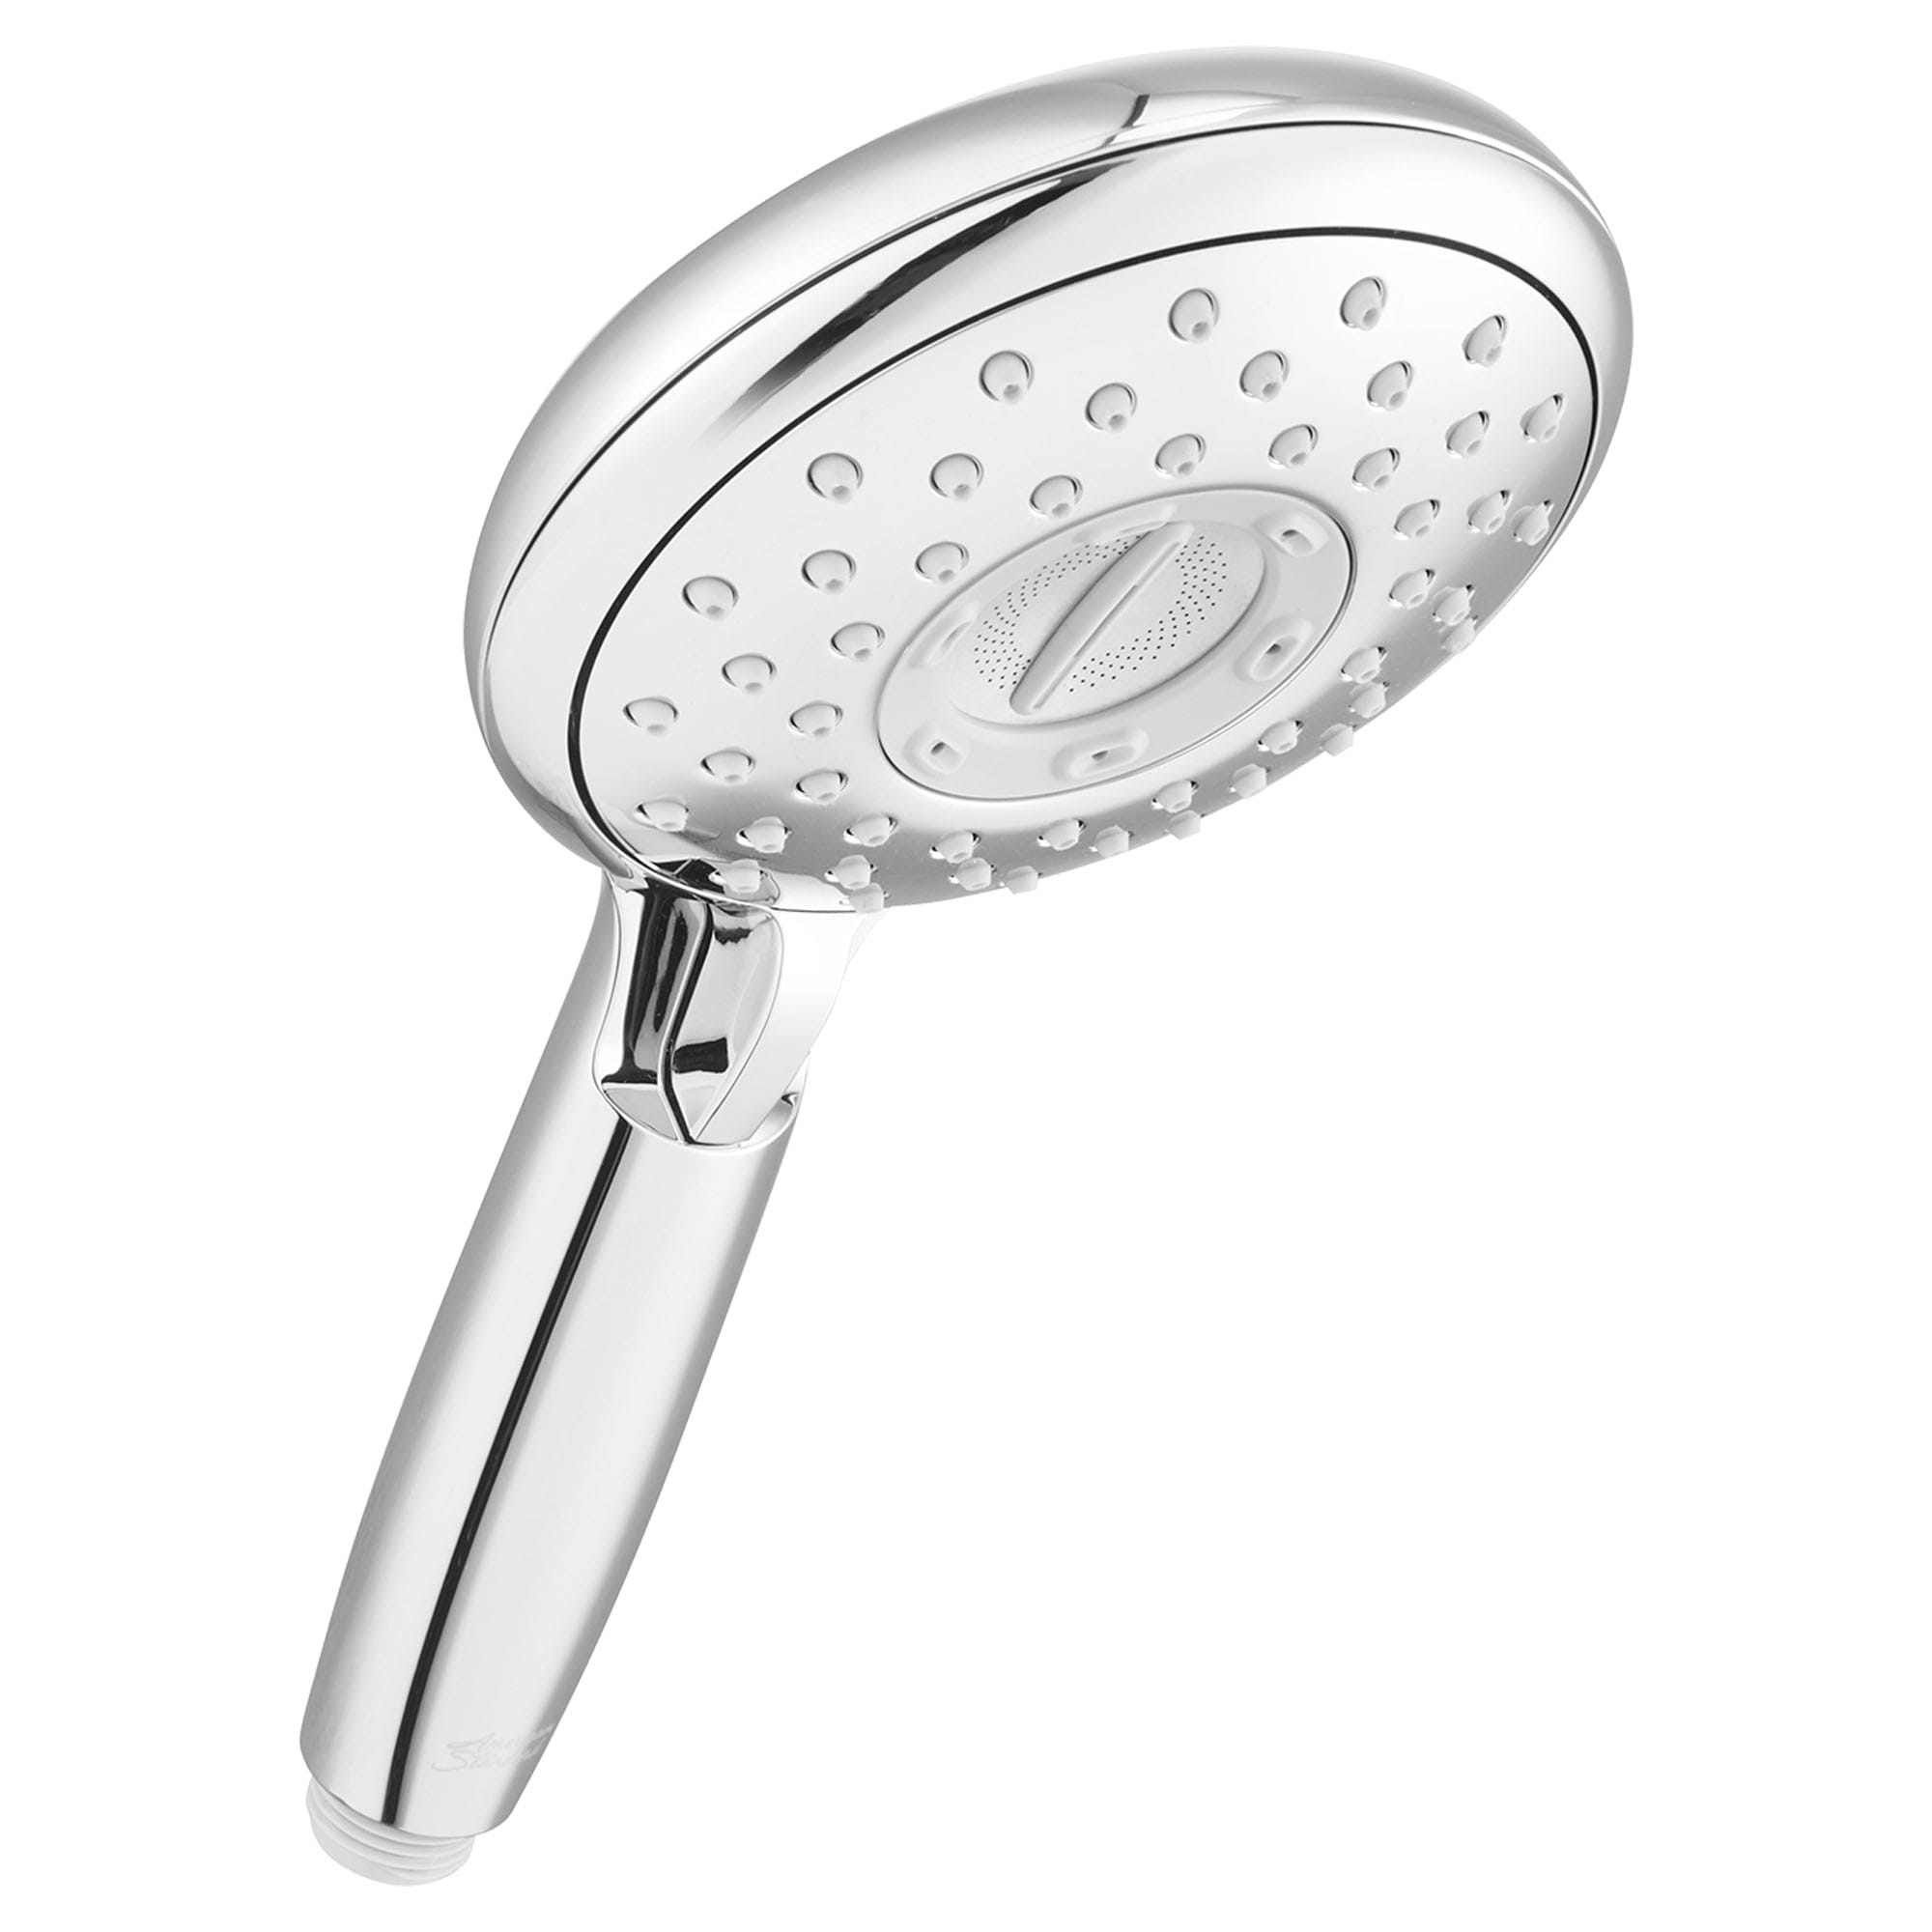 Spectra Handheld 18 gpm 68 L min 5 Inch 4 Function Hand Shower CHROME